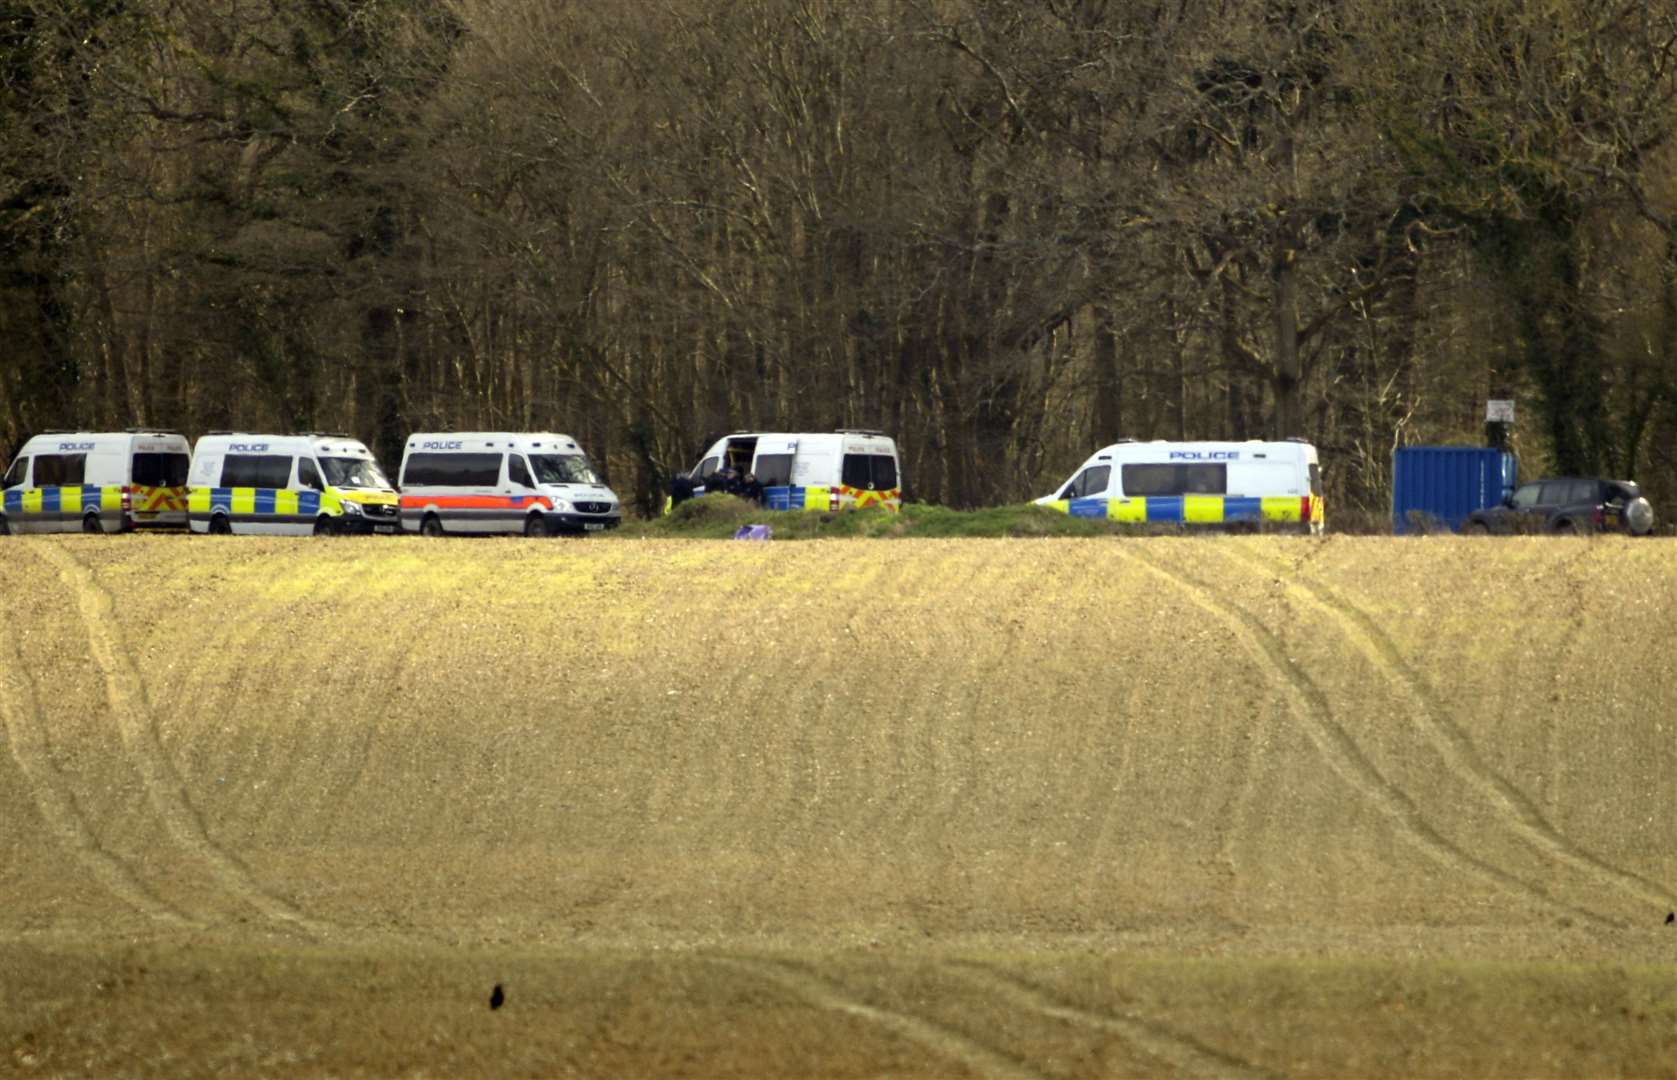 Sarah Everard's body was found in woodland off Fridd Lane last week. Picture: Barry Goodwin